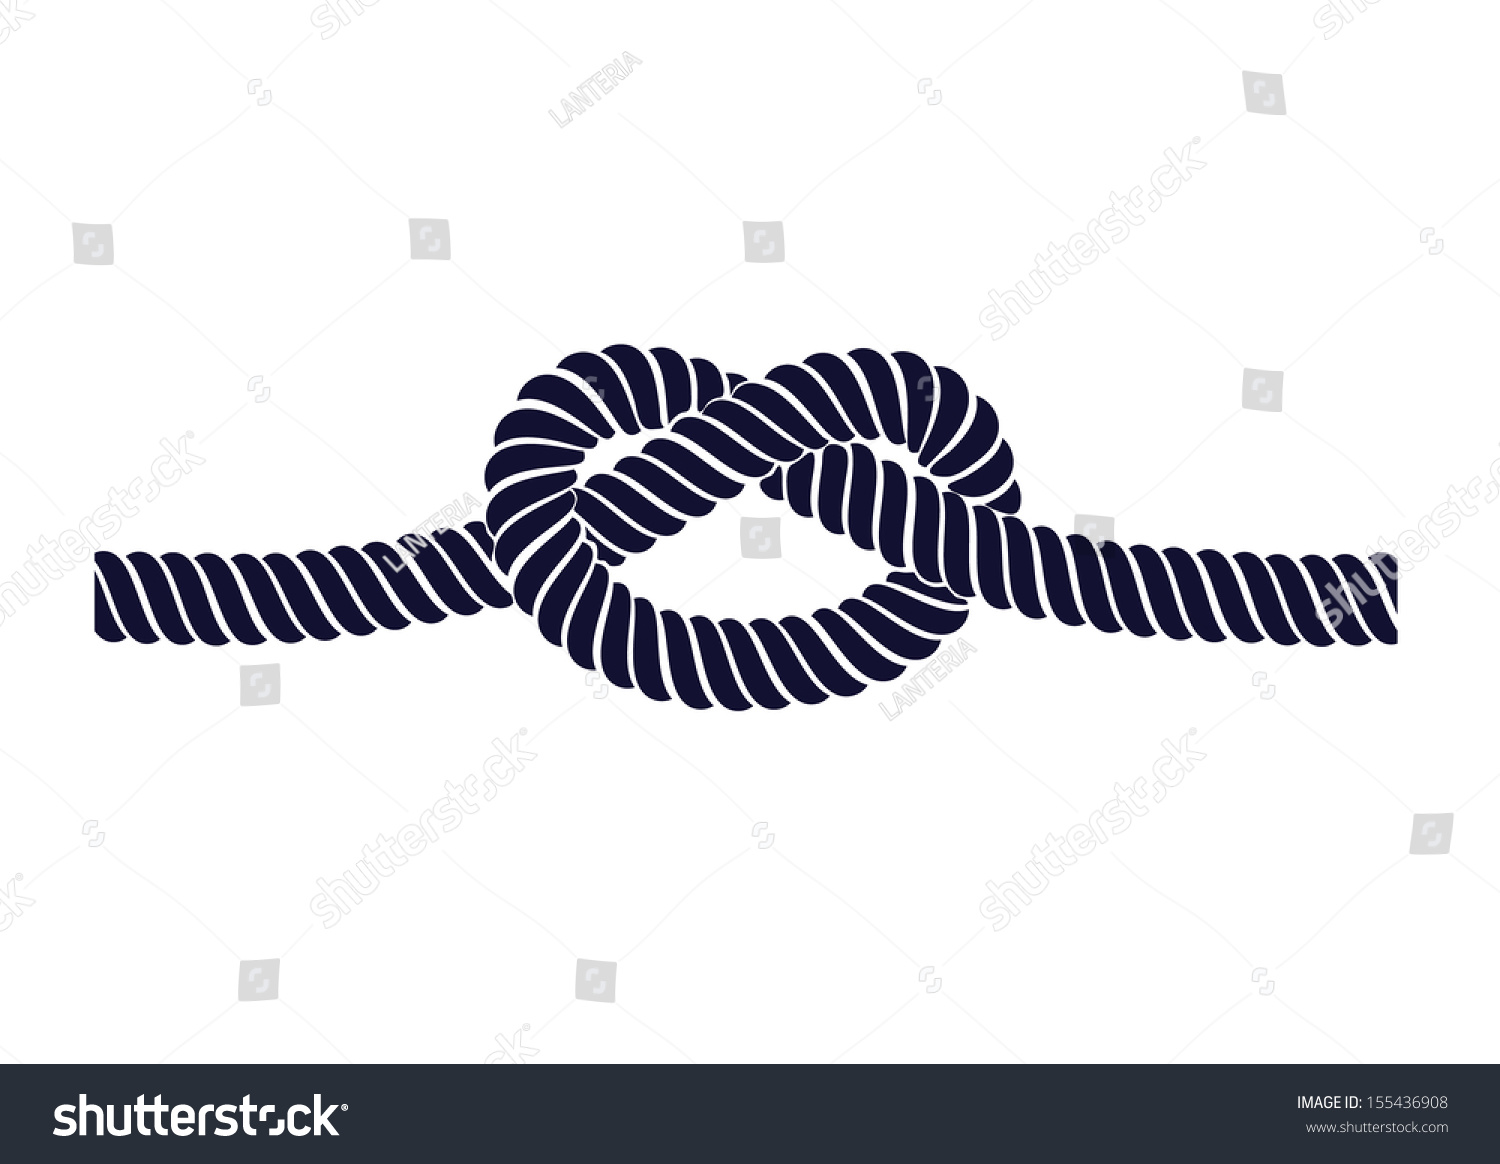 Rope Knot On A White Background Stock Vector Illustration 155436908 ...